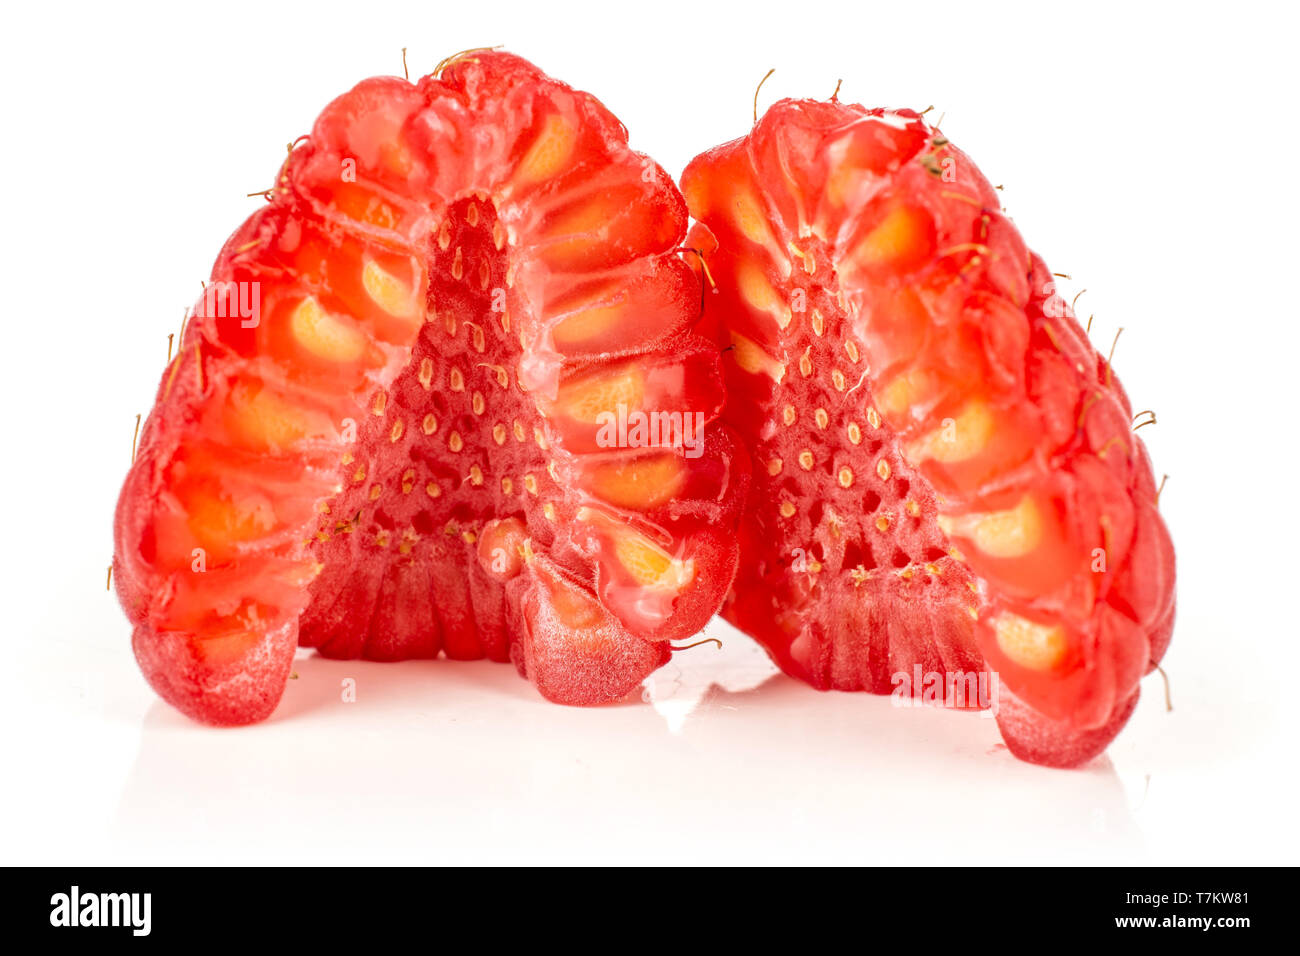 Group of two halves of fresh red raspberry cross section isolated on white background Stock Photo